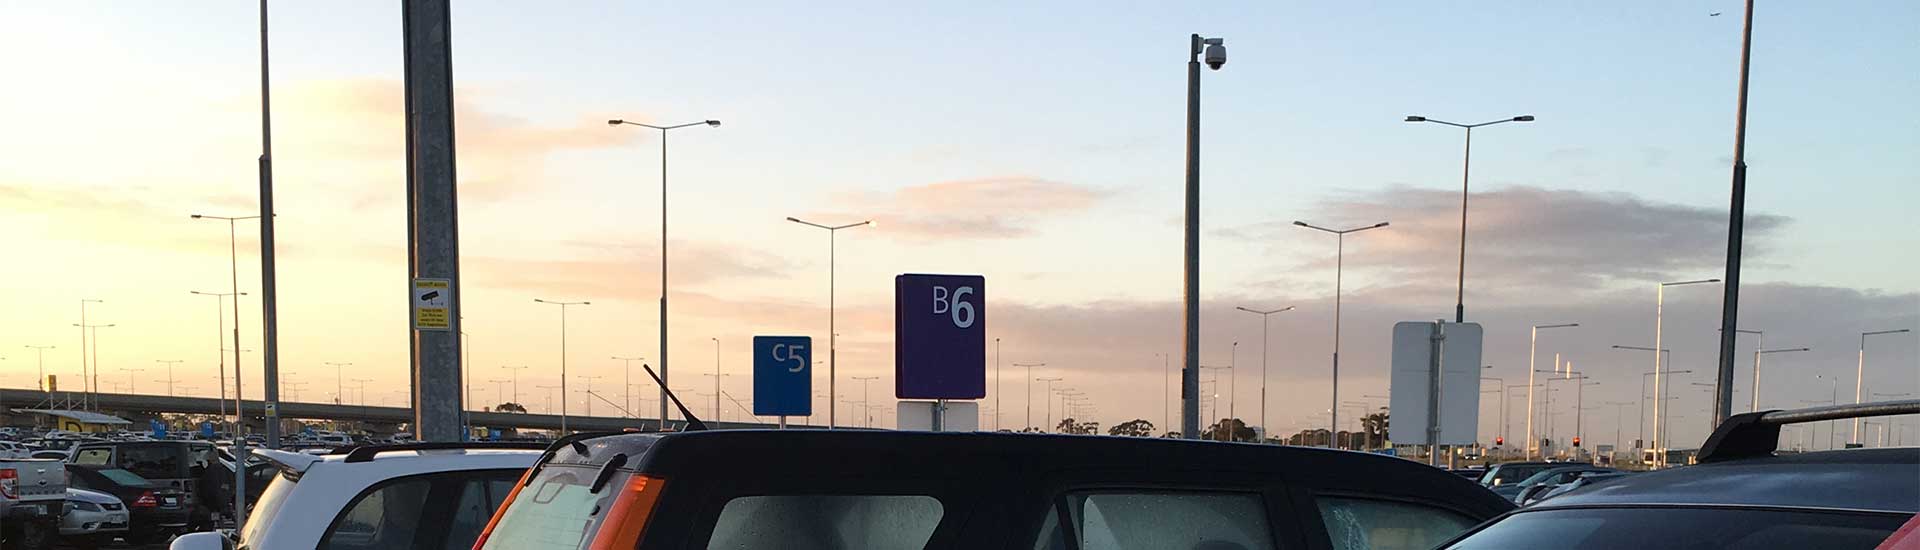 Photo of where we parked at Melbourne Airport Car Park